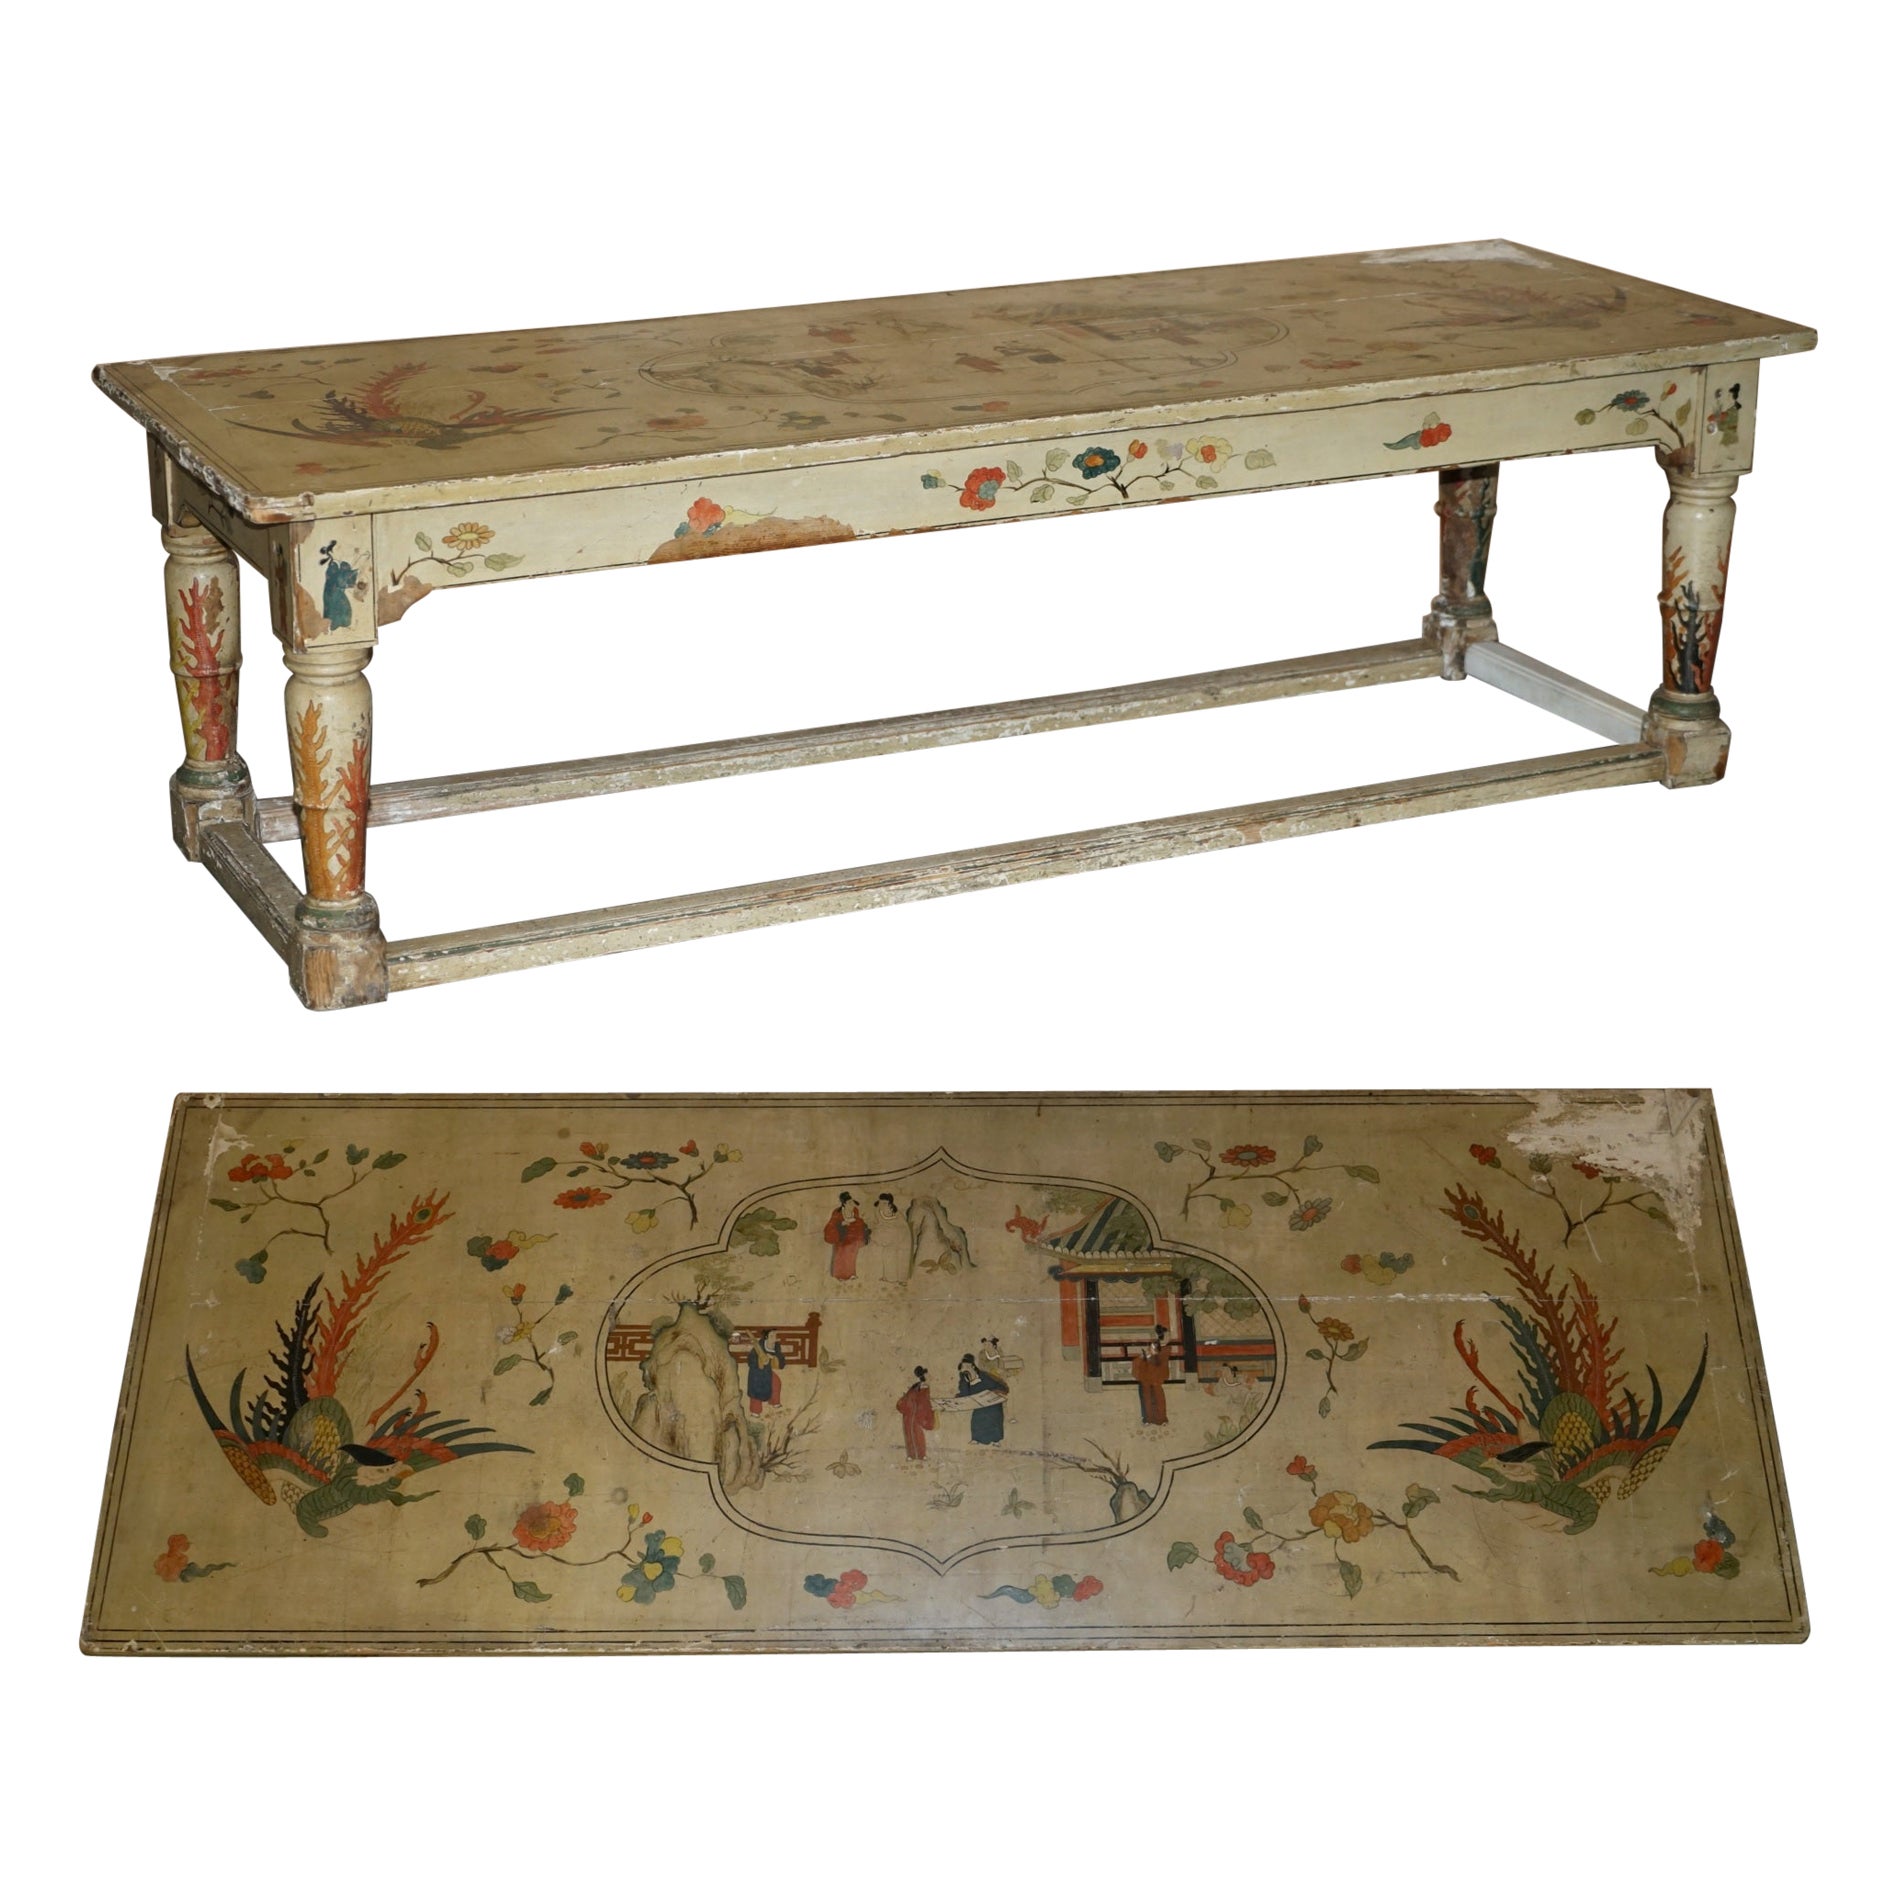 Important Antique Georgian Chinoiserie circa 1800 Chinese Refectory Dining Table For Sale